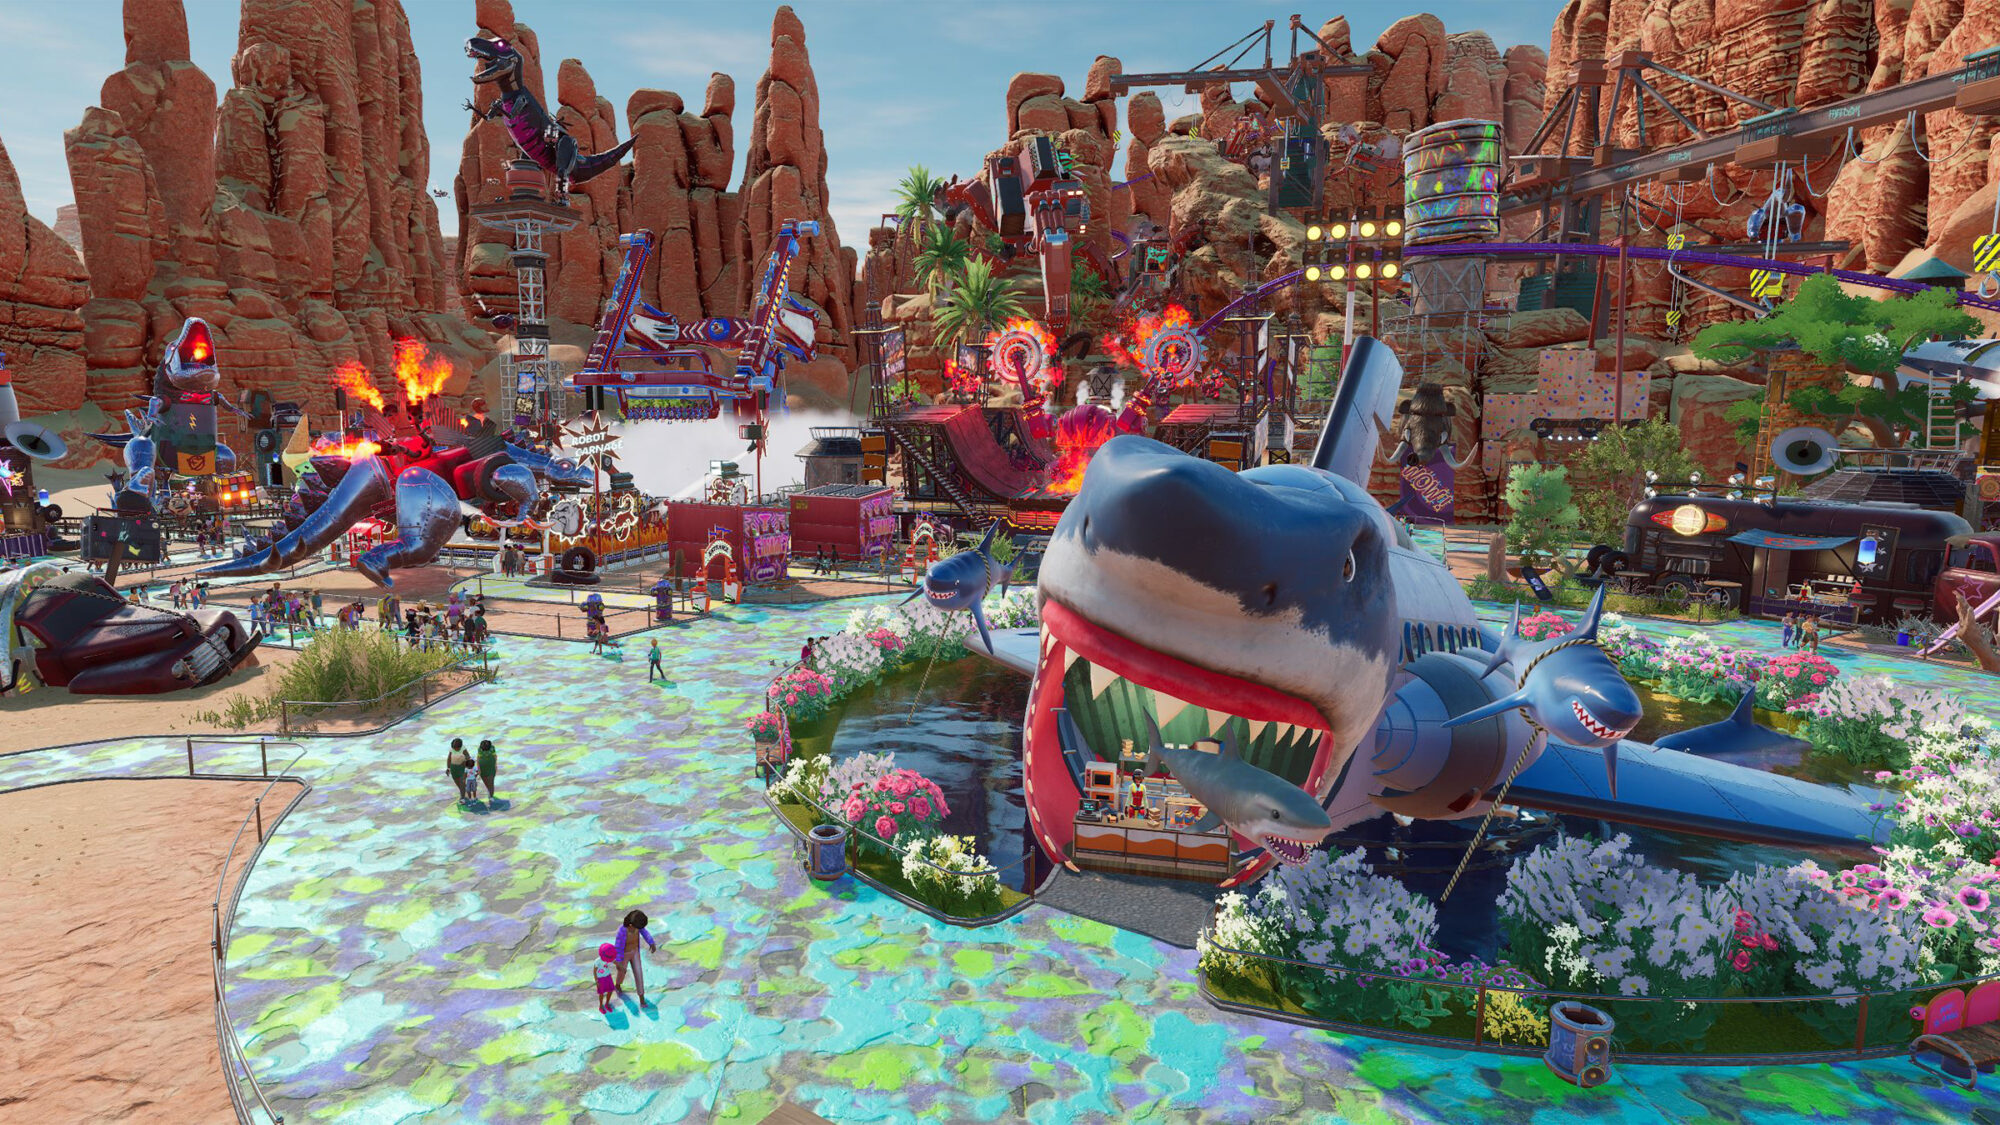 Park Beyond is a theme park sim that allows its players to create